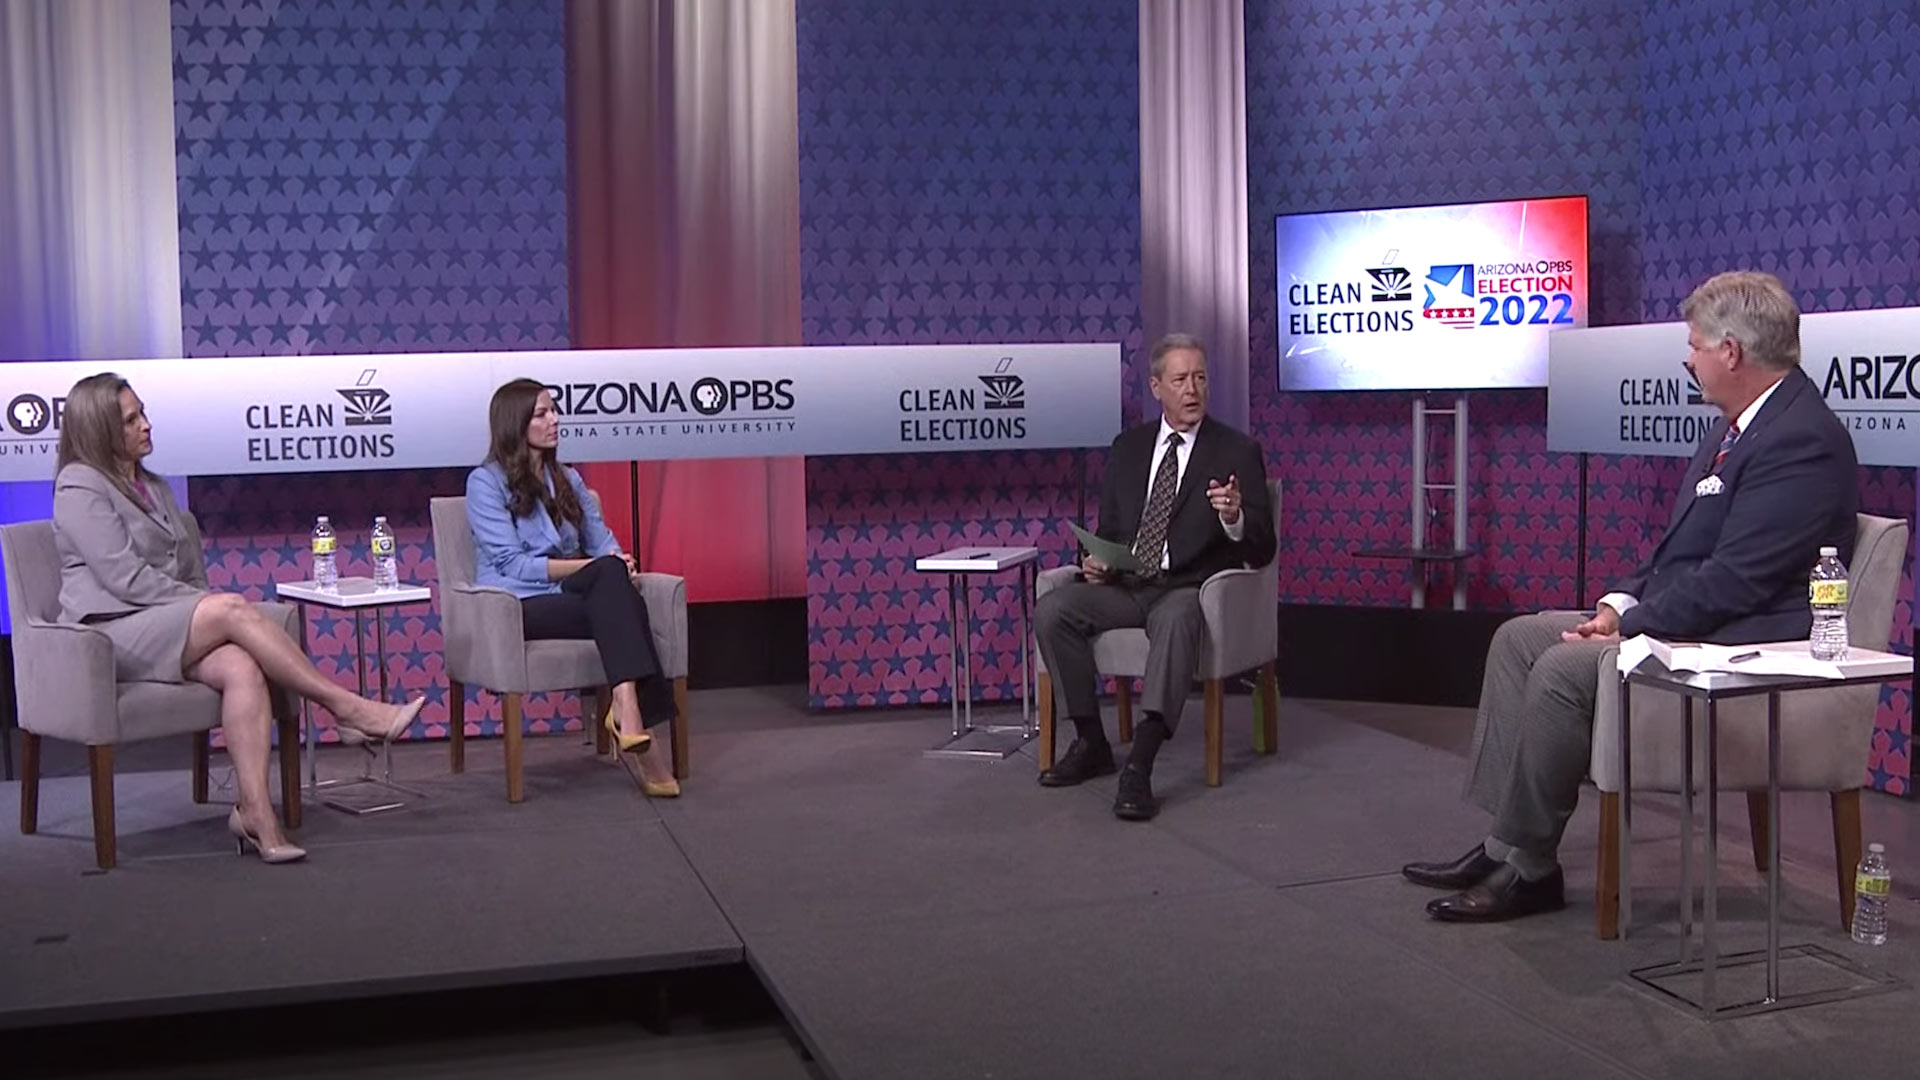 State Rep. Shawnna Bolick, state Sen. Michelle Ugenti Rita, Arizona PBS host Ted Simons and Beau Lane at a June 15, 2022 candidate debate in Phoenix. State Rep. Mark Finchem, who is also seeking the Republican nomination for secretary of state, did not attend.